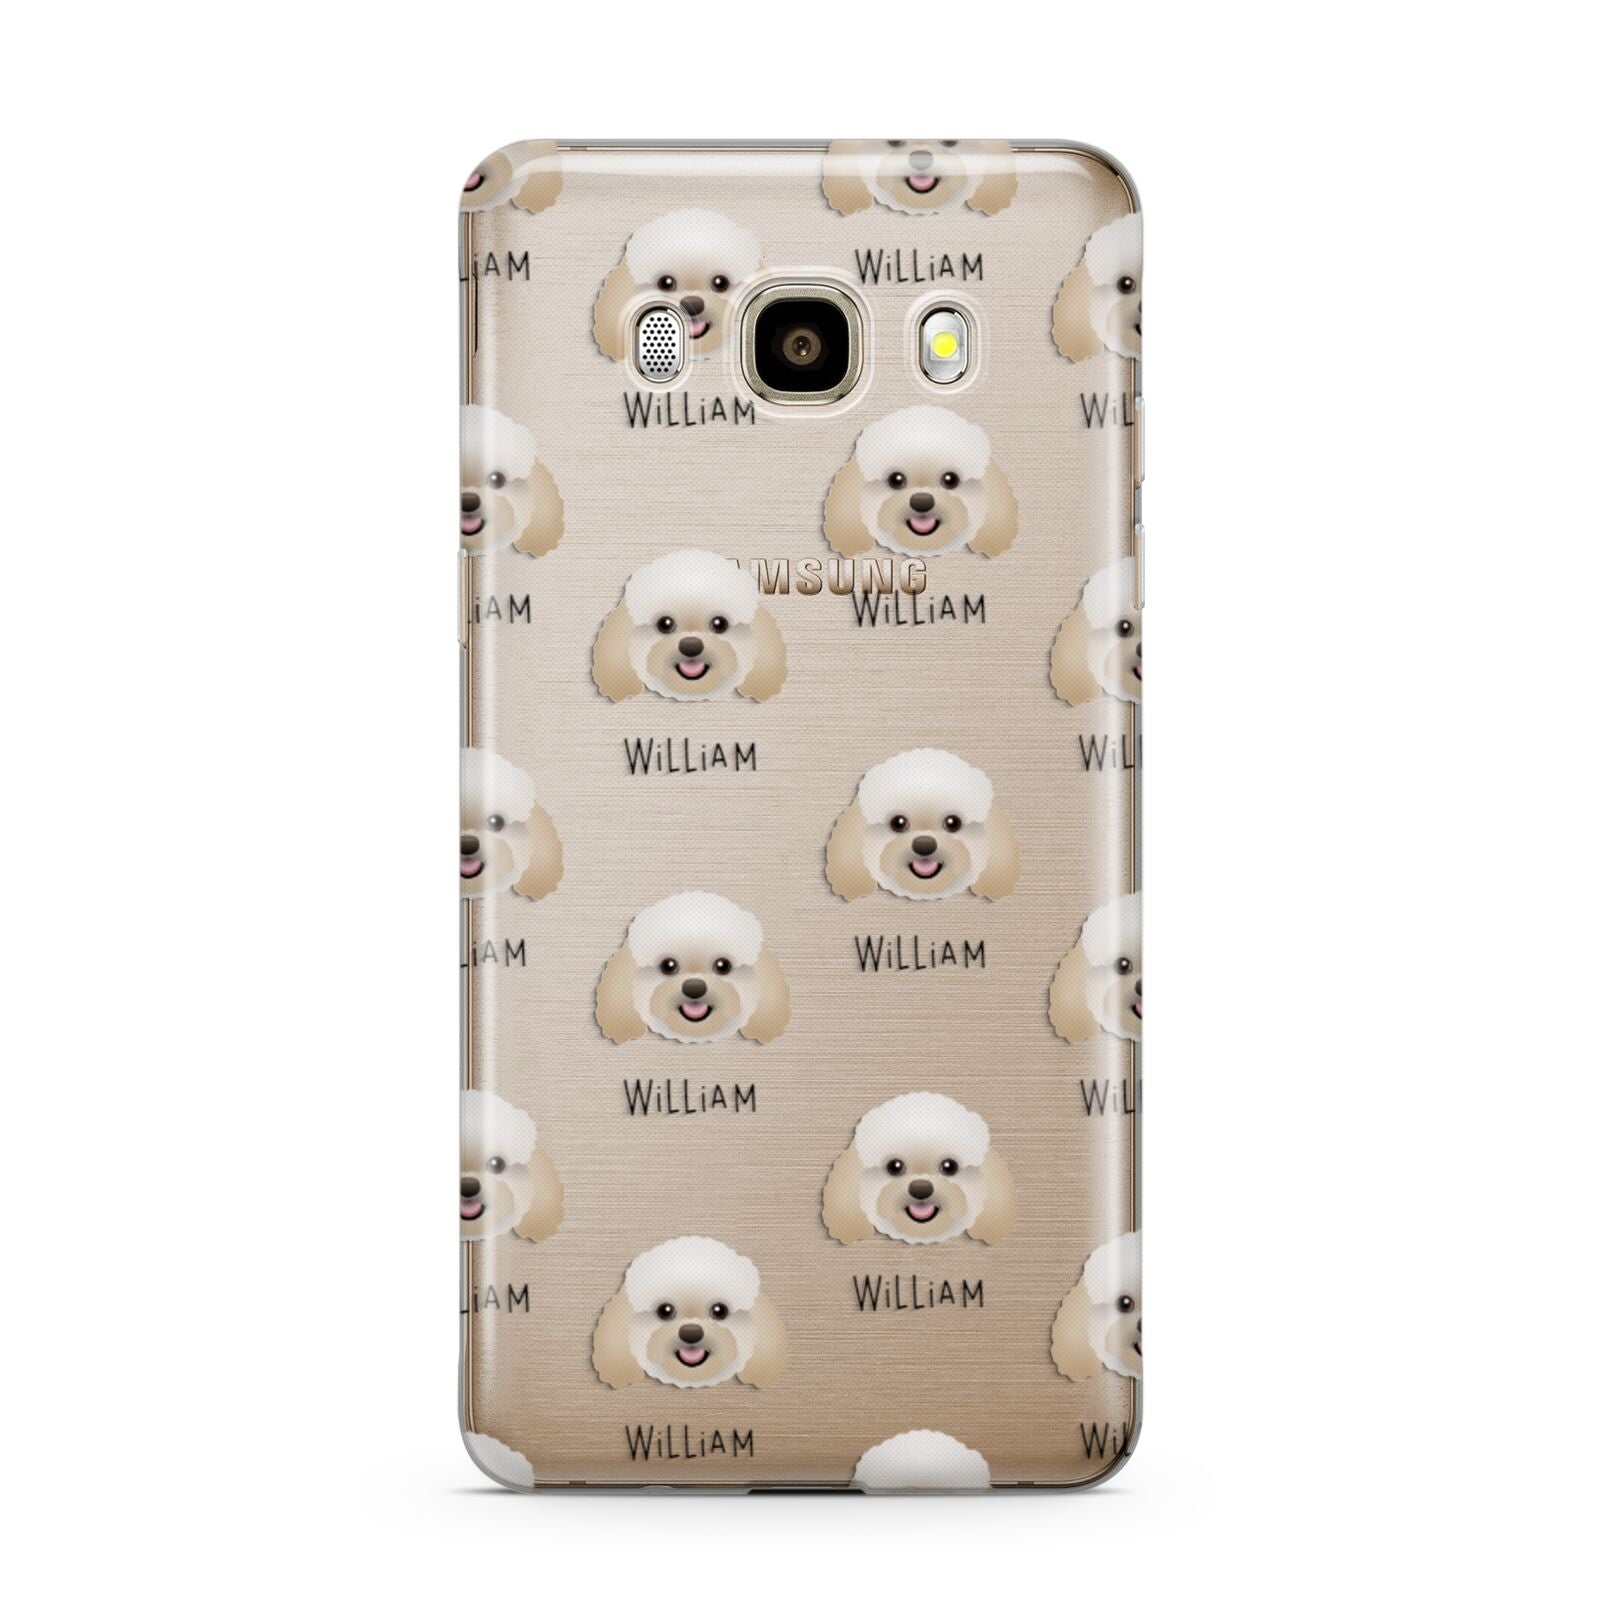 Bich poo Icon with Name Samsung Galaxy J7 2016 Case on gold phone